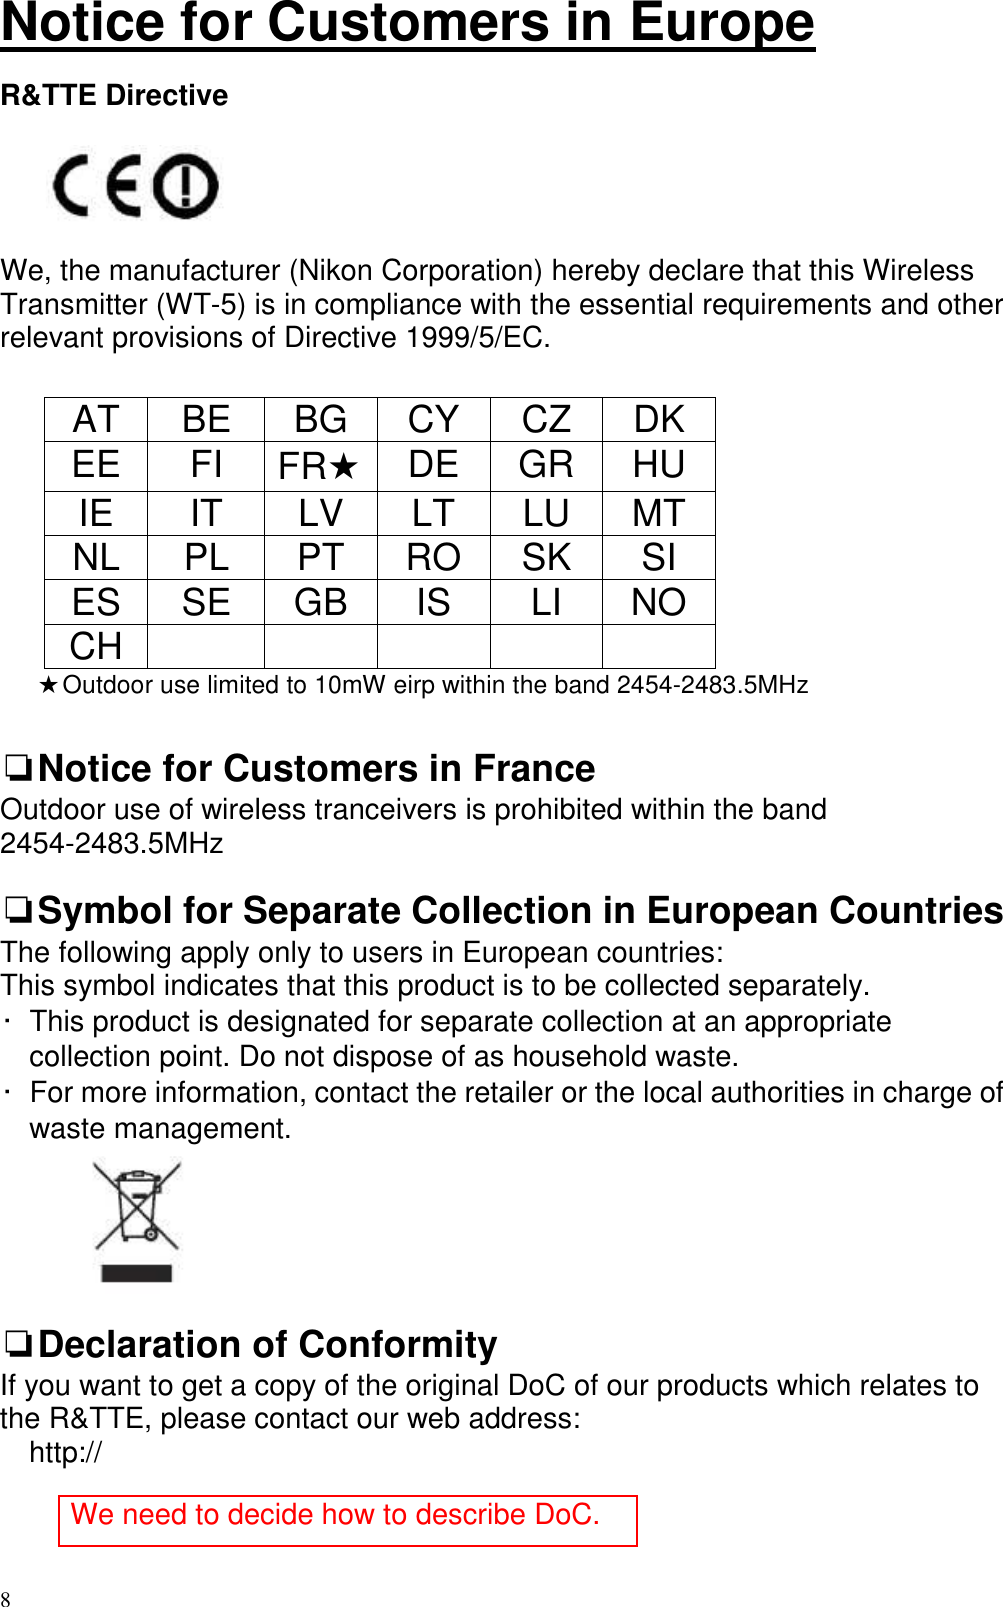   8 Notice for Customers in Europe  R&amp;TTE Directive        We, the manufacturer (Nikon Corporation) hereby declare that this Wireless Transmitter (WT-5) is in compliance with the essential requirements and other relevant provisions of Directive 1999/5/EC.     AT  BE  BG  CY  CZ  DK EE  FI  FR★ DE  GR  HU IE  IT  LV  LT  LU  MT NL  PL  PT  RO  SK  SI ES  SE  GB  IS  LI  NO CH            ★Outdoor use limited to 10mW eirp within the band 2454-2483.5MHz  ❏Notice for Customers in France Outdoor use of wireless tranceivers is prohibited within the band 2454-2483.5MHz  ❏Symbol for Separate Collection in European Countries The following apply only to users in European countries: This symbol indicates that this product is to be collected separately. •  This product is designated for separate collection at an appropriate collection point. Do not dispose of as household waste. •  For more information, contact the retailer or the local authorities in charge of waste management.   ❏Declaration of Conformity If you want to get a copy of the original DoC of our products which relates to the R&amp;TTE, please contact our web address: http://     We need to decide how to describe DoC. 